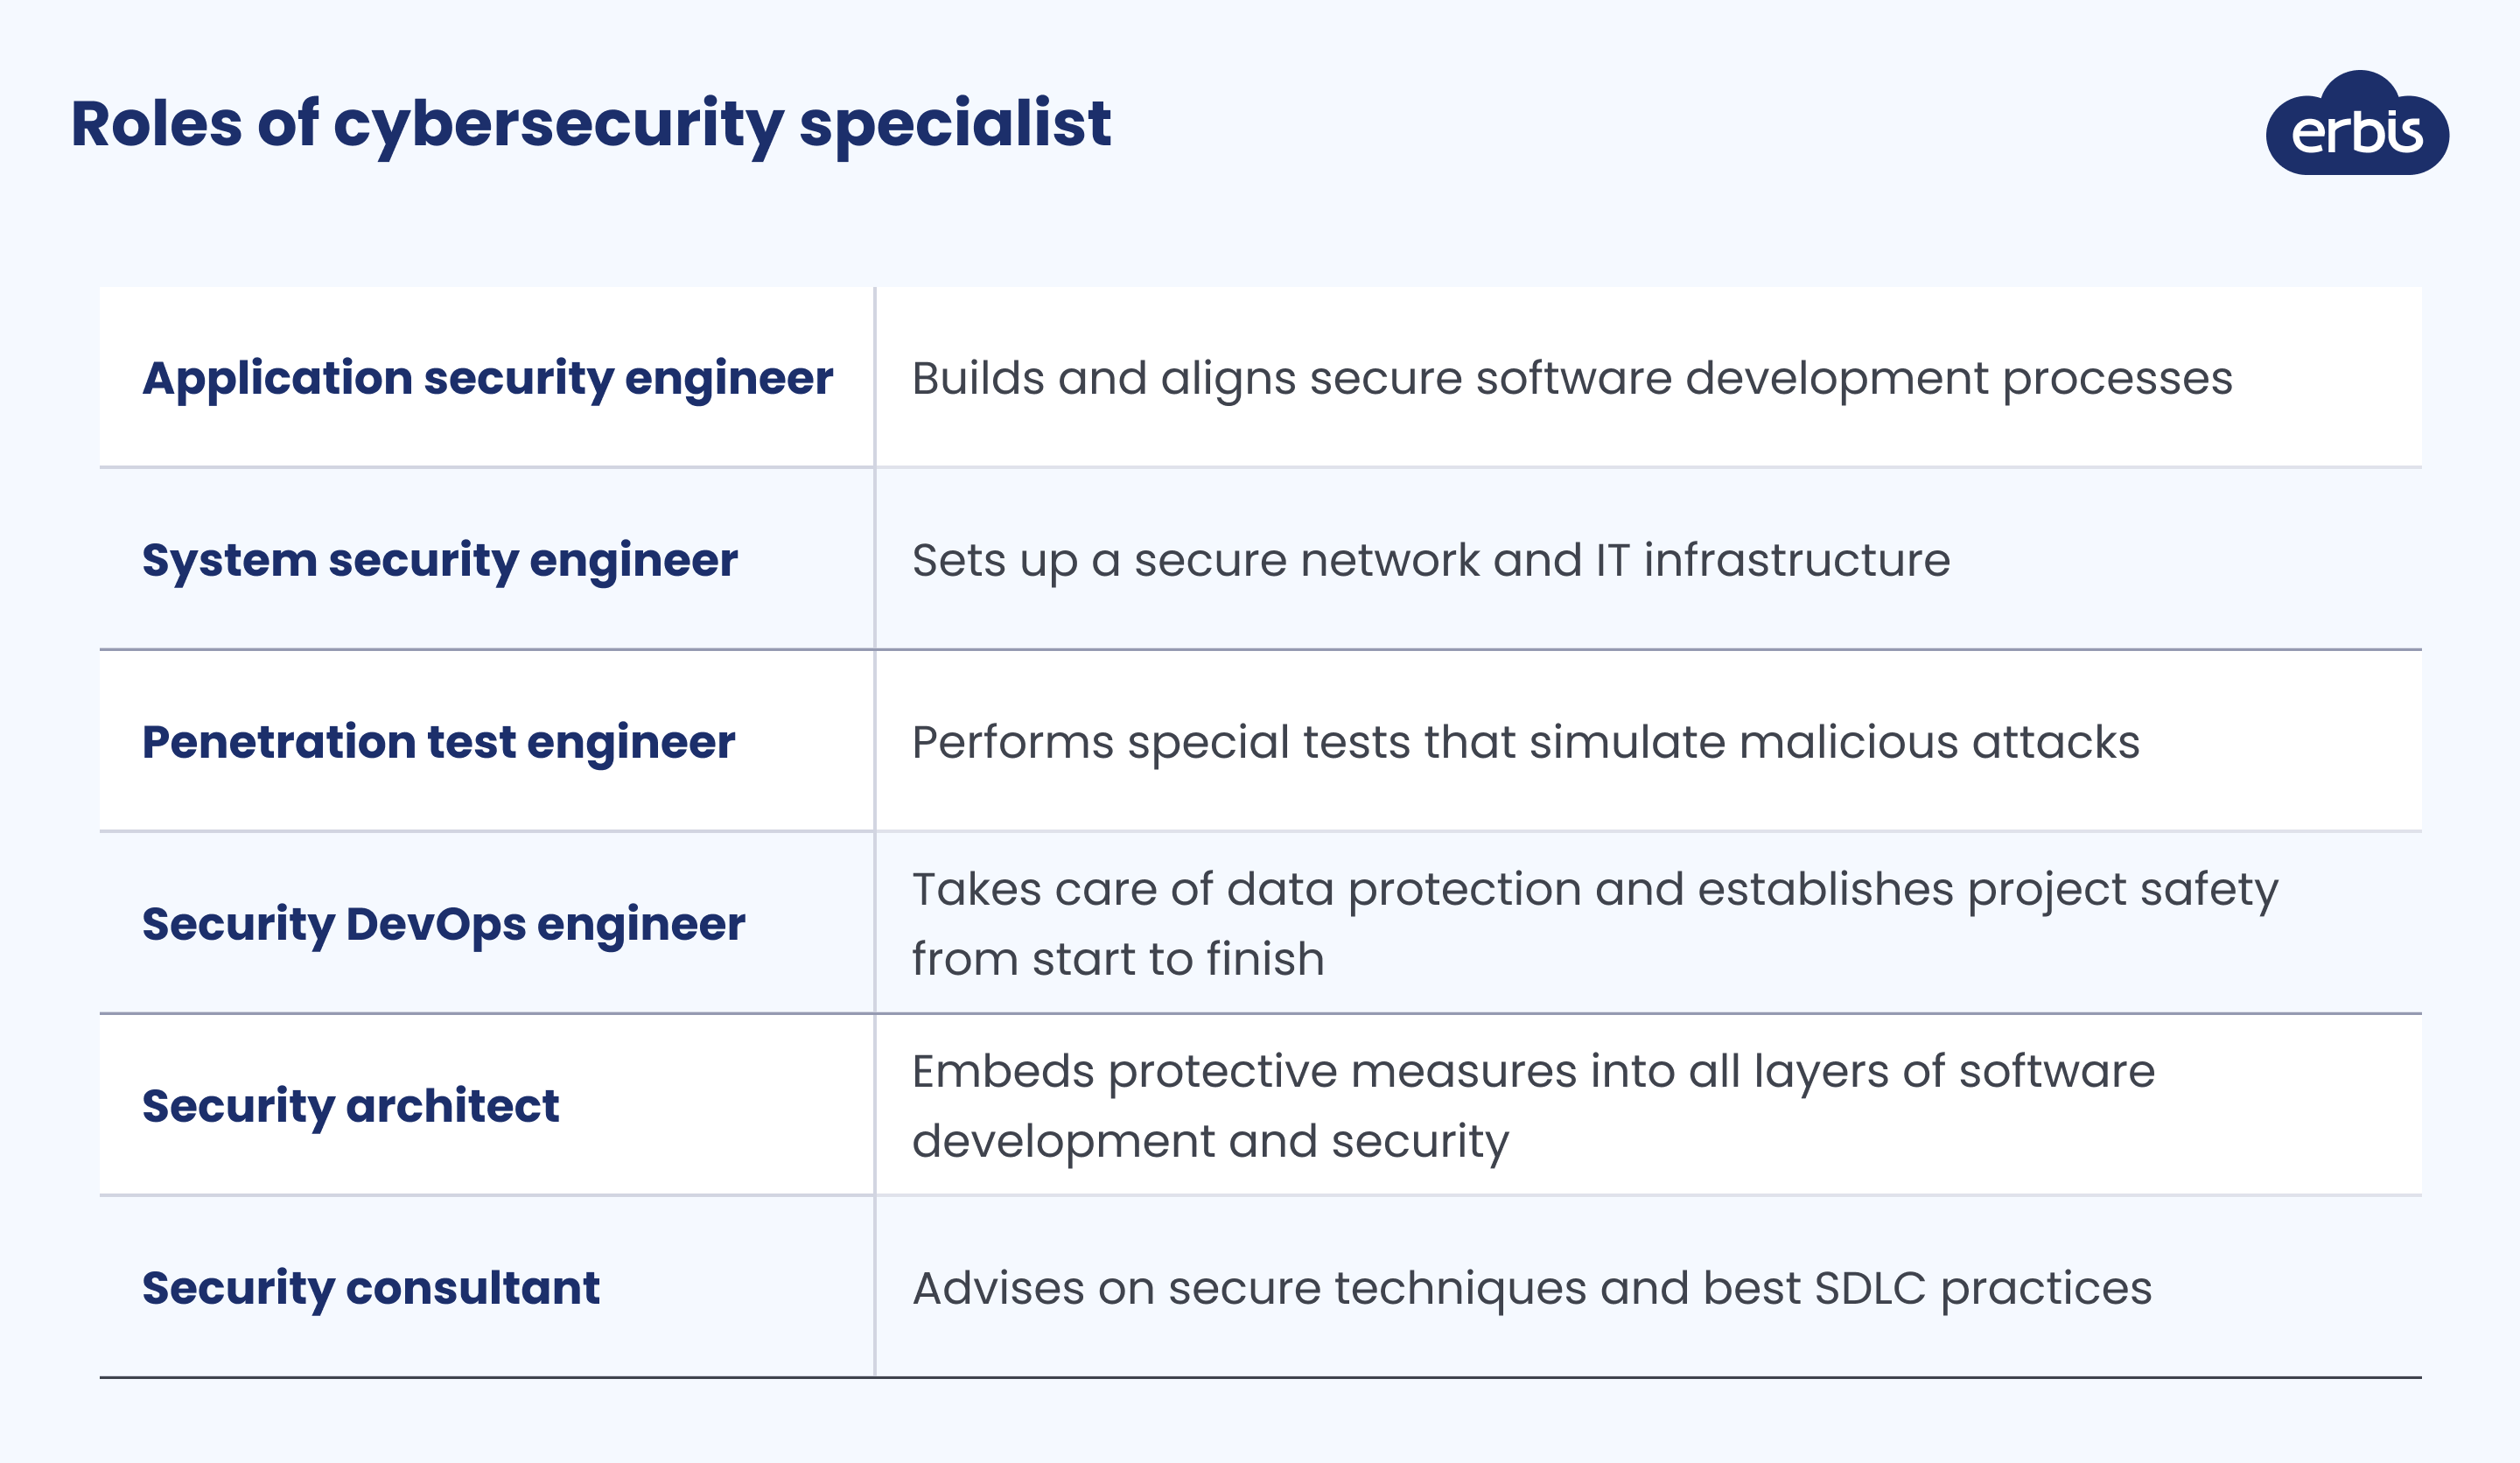 Roles of cybersecurity specialist